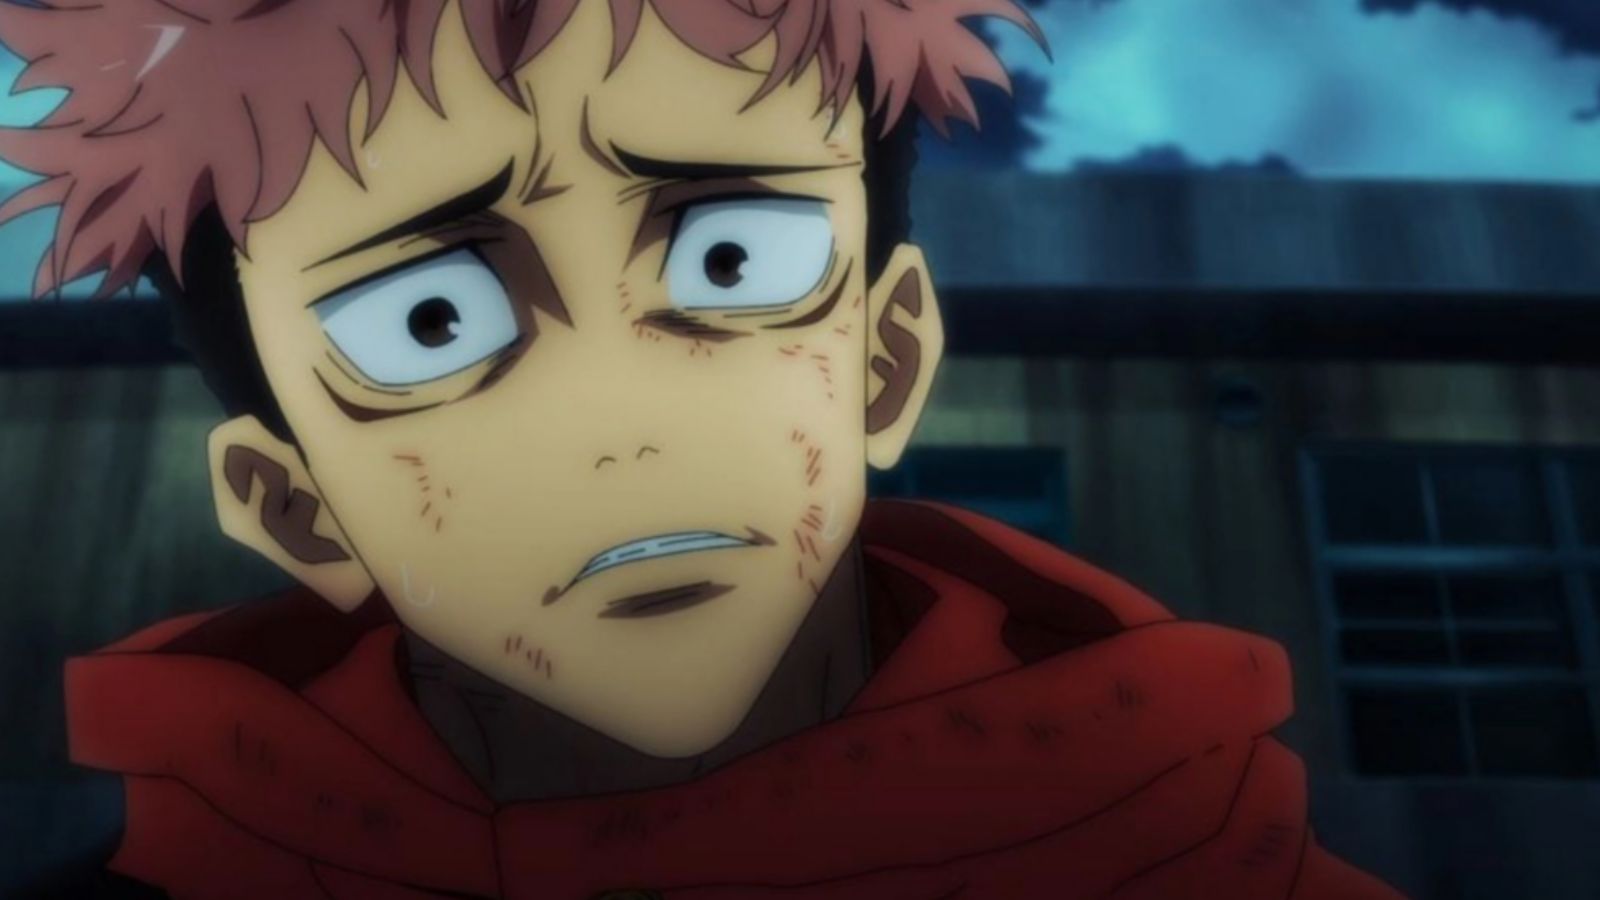 Jujutsu Kaisen animator's deleted post caused a lot of controversy